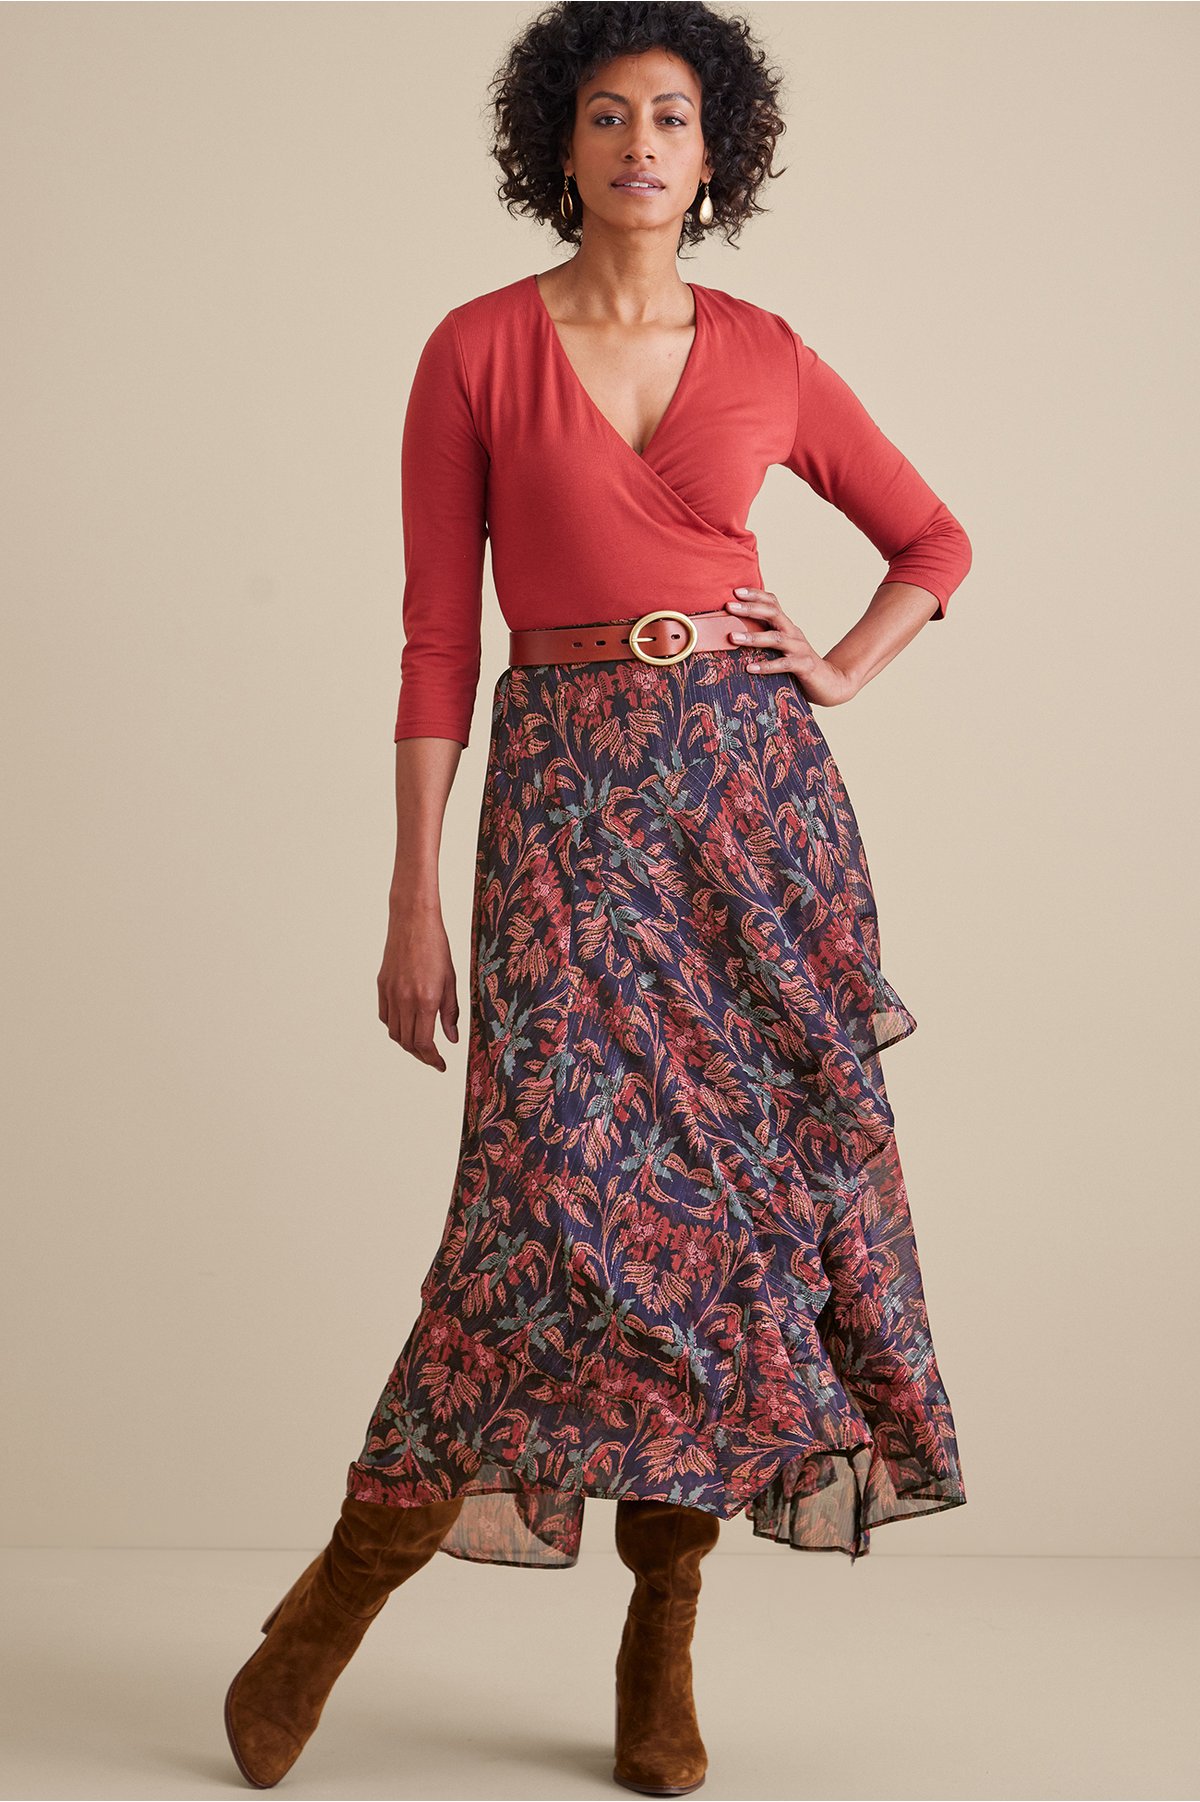 Women's Flora Skirt by Soft Surroundings, in Multi Floral size M (10-12)